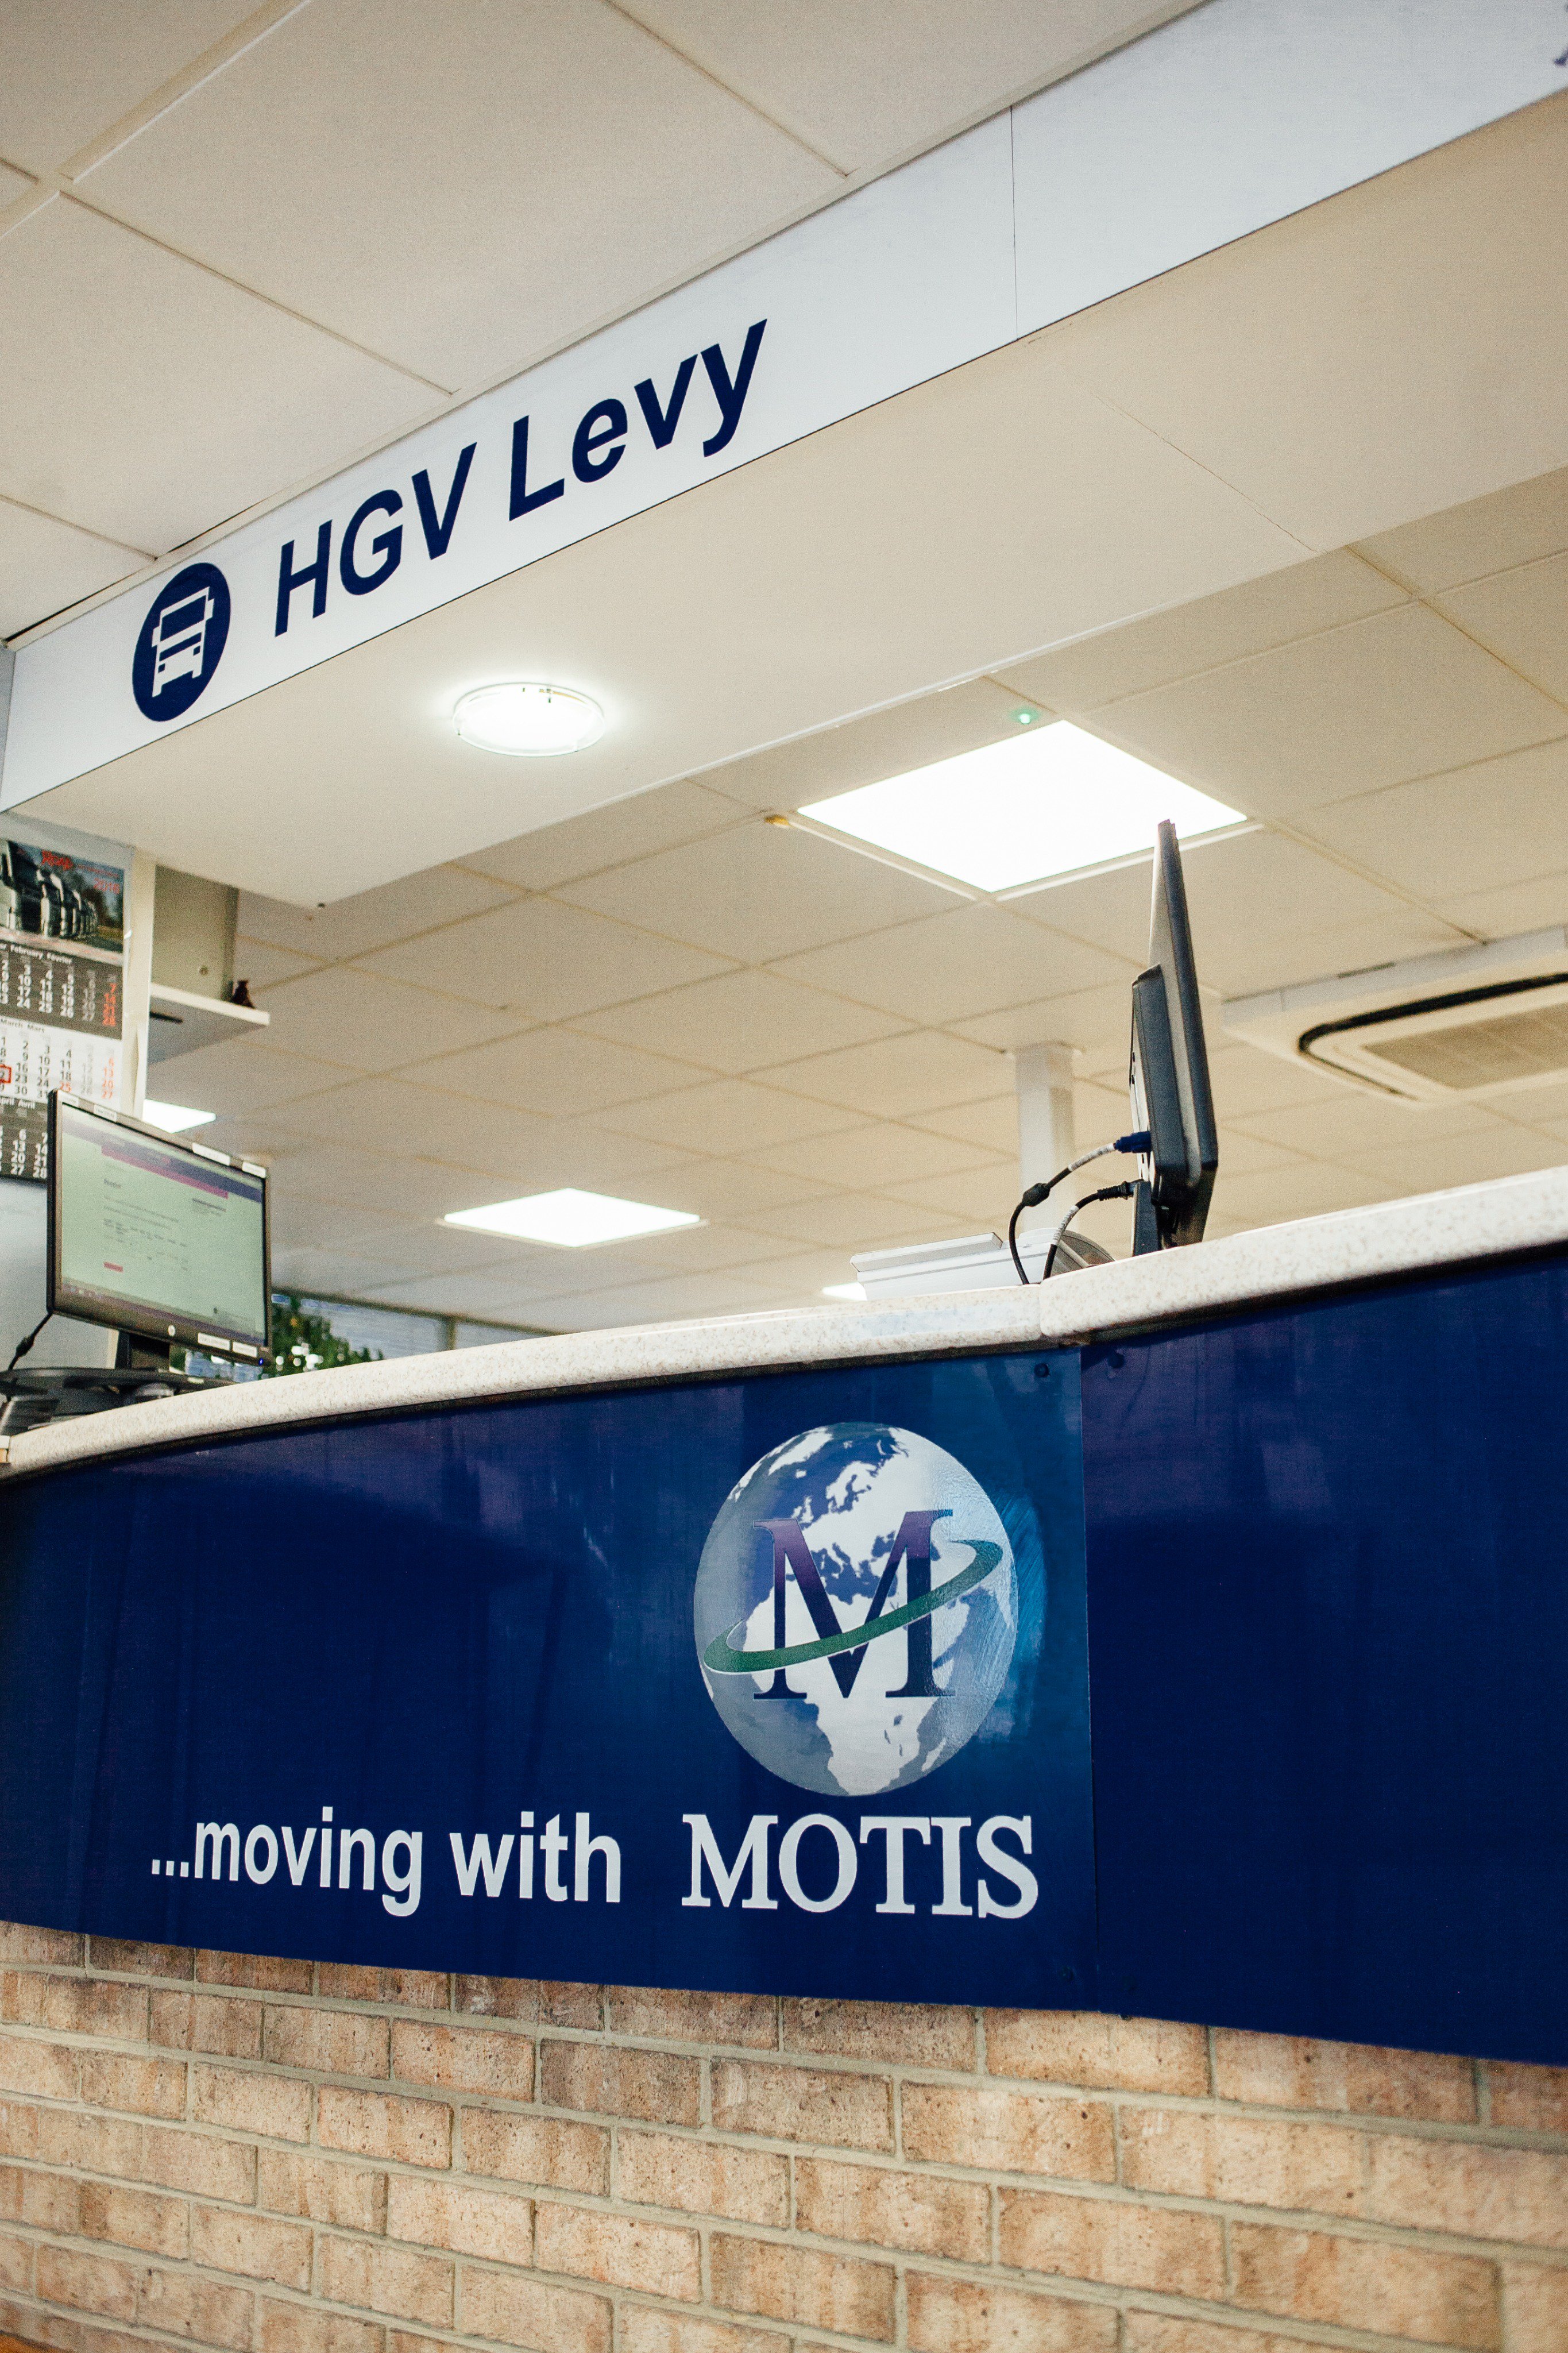 Motis on Twitter: "Arriving into the #Port of #Dover from the Continent? Don't forget you can pay the Levy / Dart Charge at the #Motis FSA Facility within the #PortofDover!